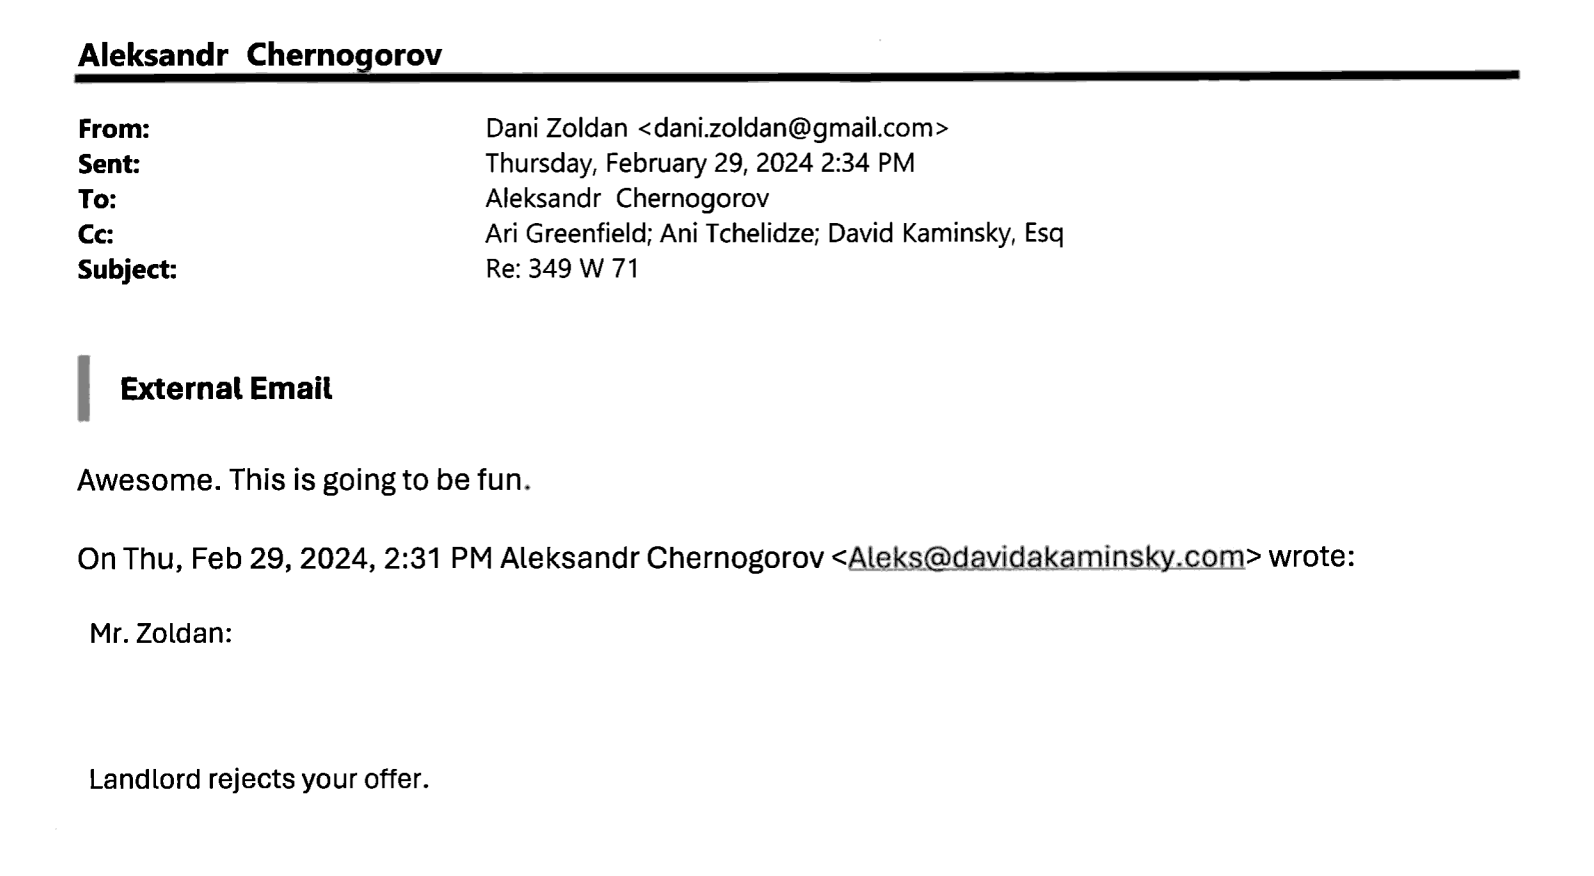 Email from Aleksandr Chernogorov to Dani Zoldan on 2/29/24: "Mr. Zoldan: Landlord rejects your offer." Reply from Dani Zoldan: "Awesome. This is going to be fun."